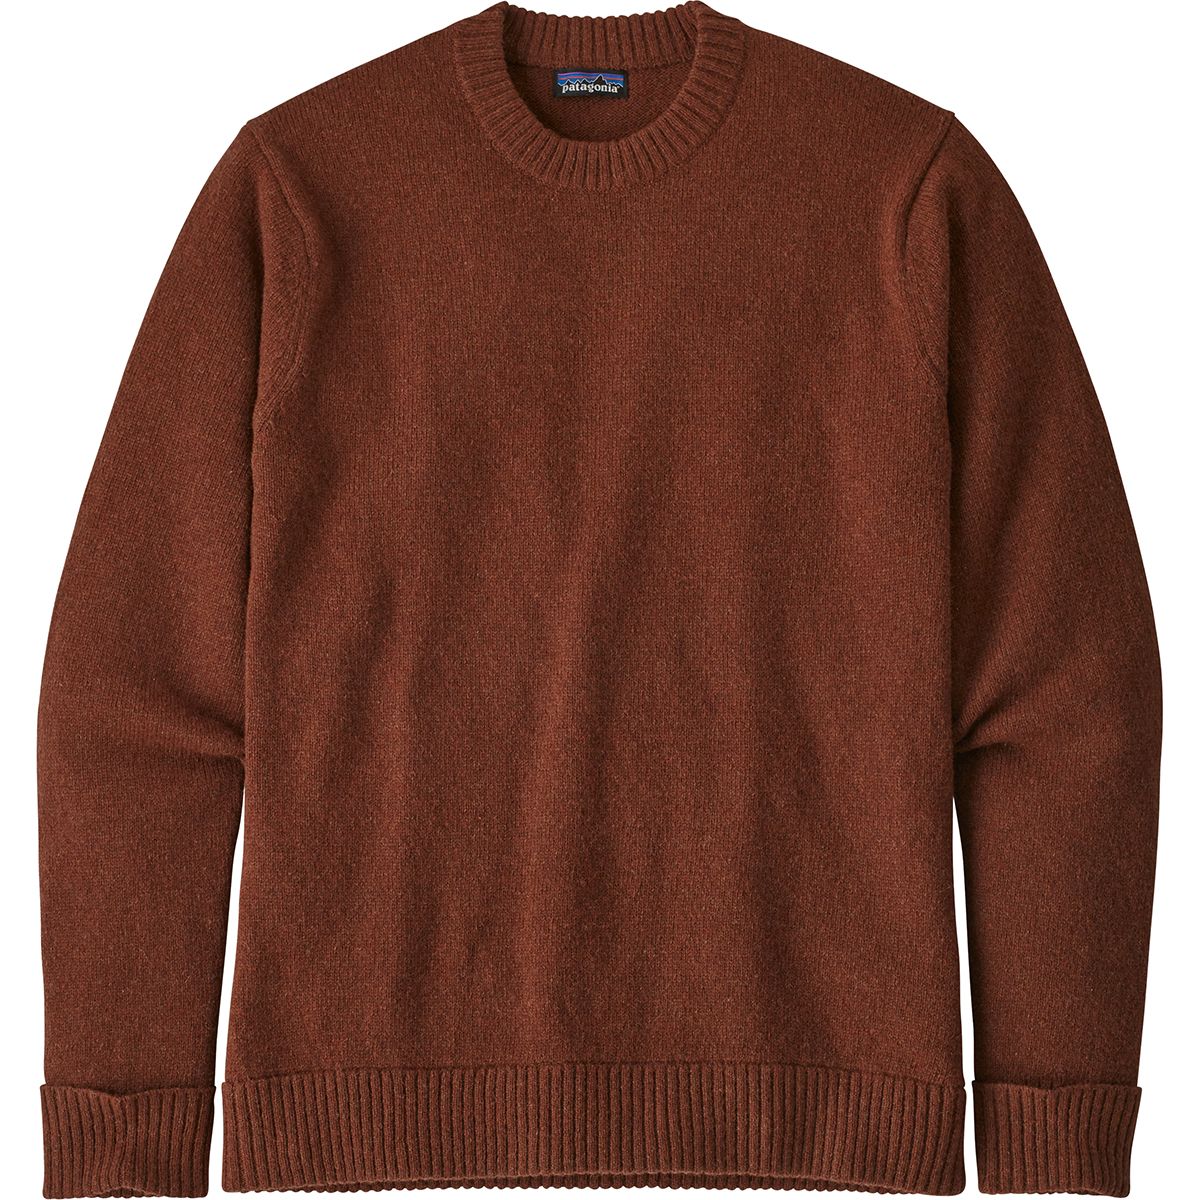 Recycled Wool Sweater - Men